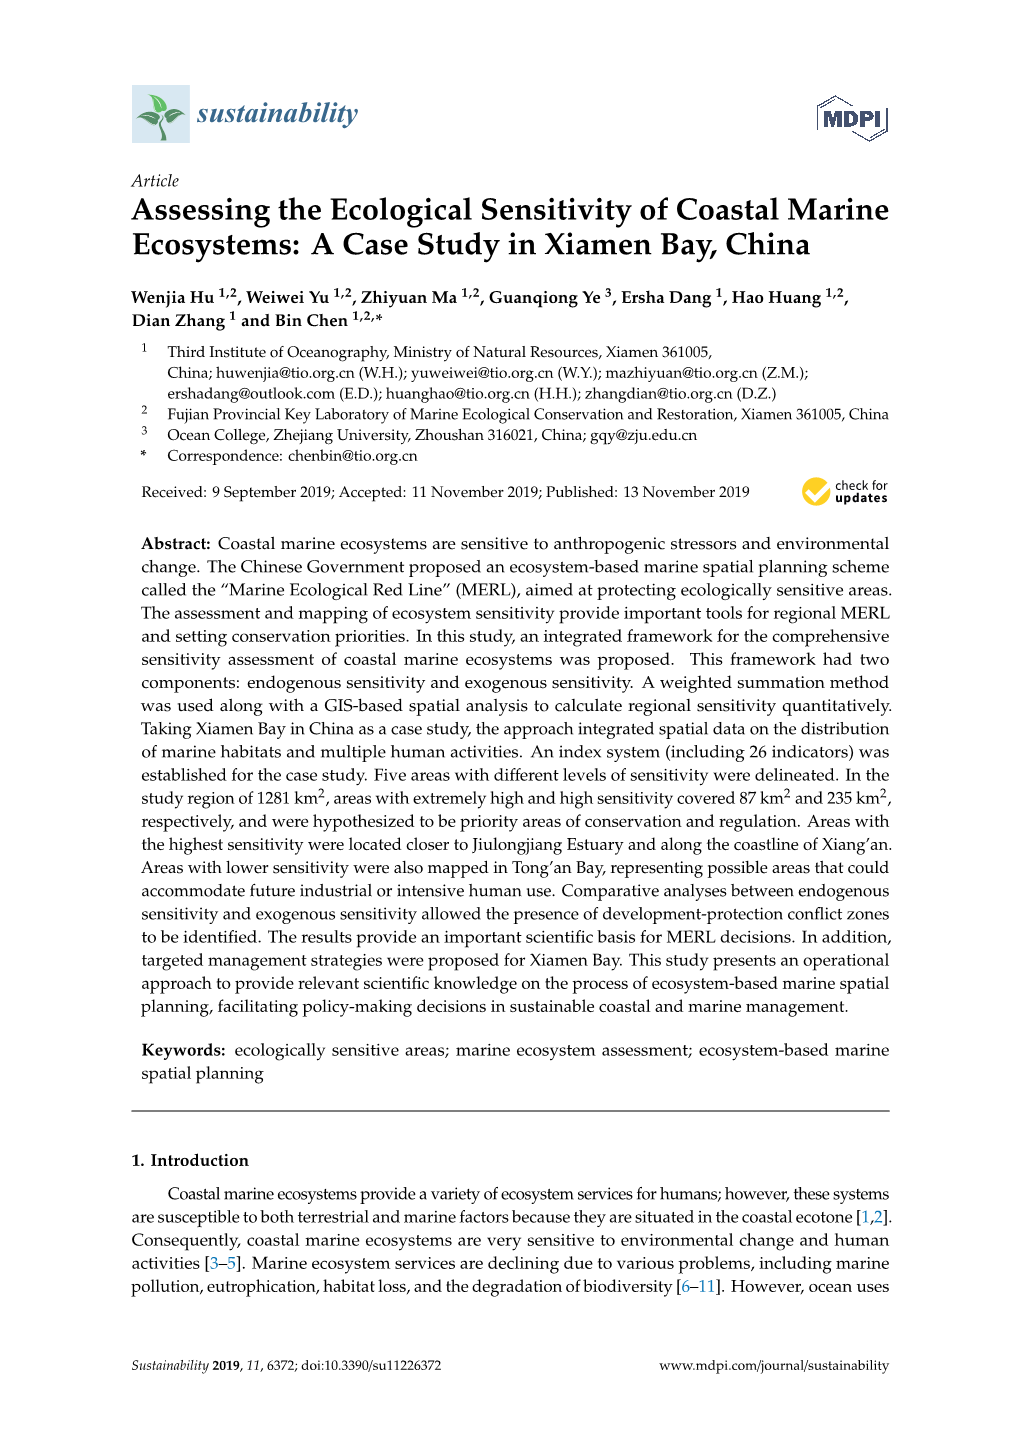 Assessing the Ecological Sensitivity of Coastal Marine Ecosystems: a Case Study in Xiamen Bay, China